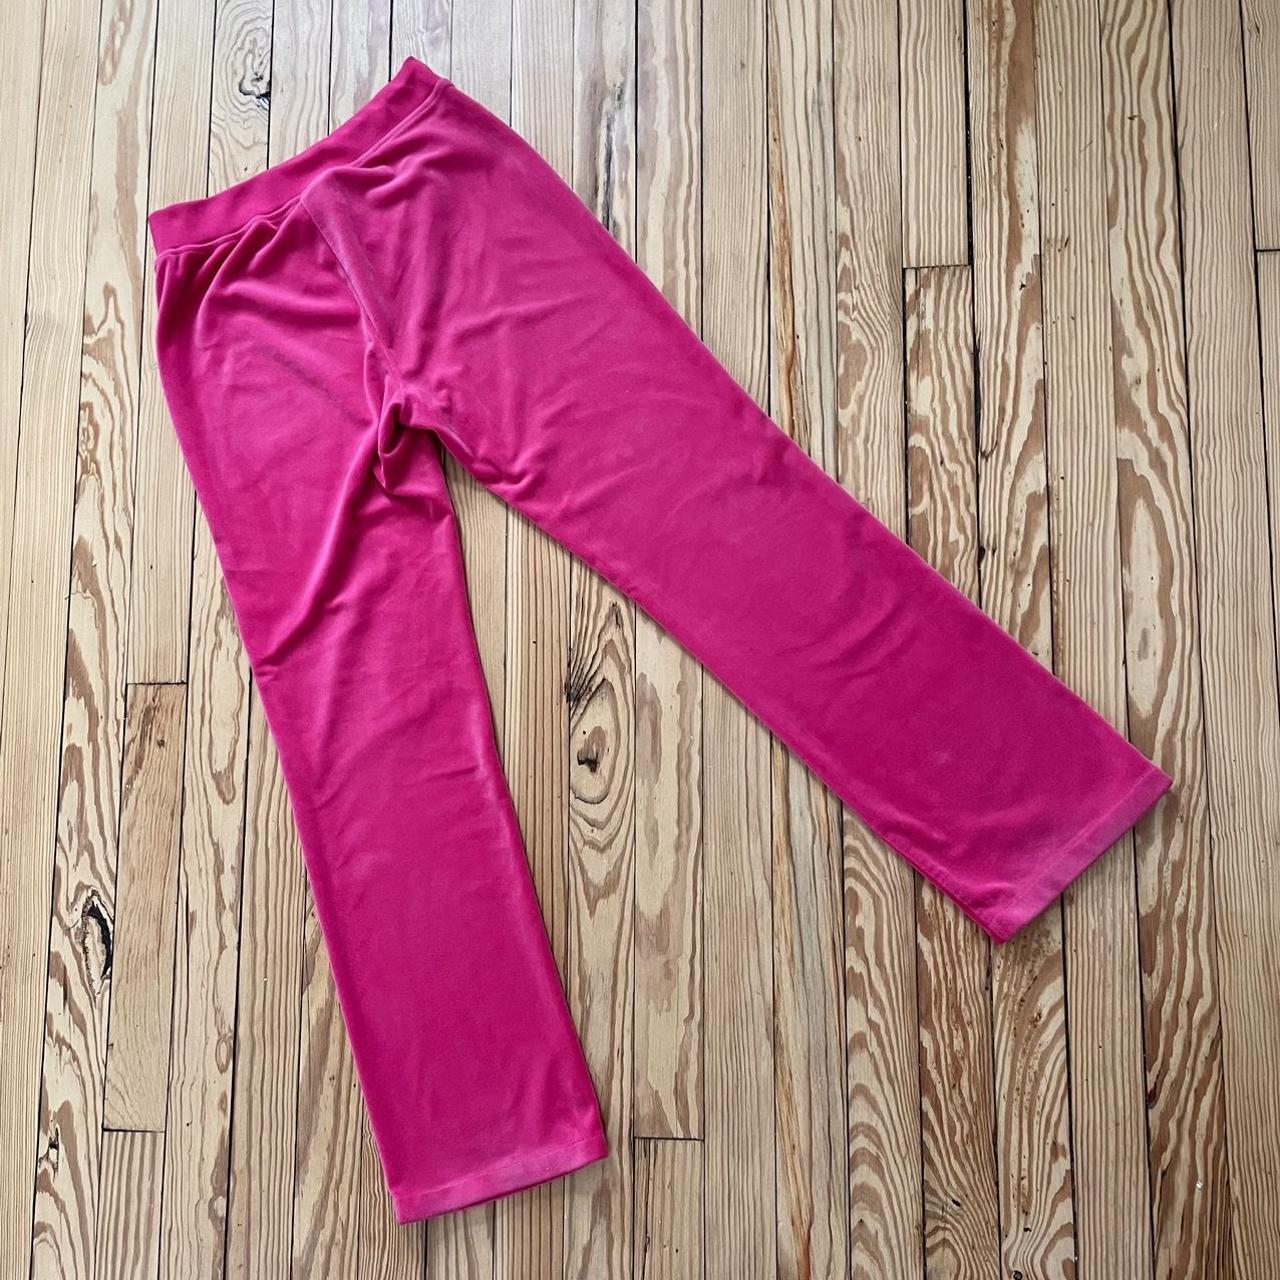 Juicy Couture Velour Fluorescent Pink Track Pants